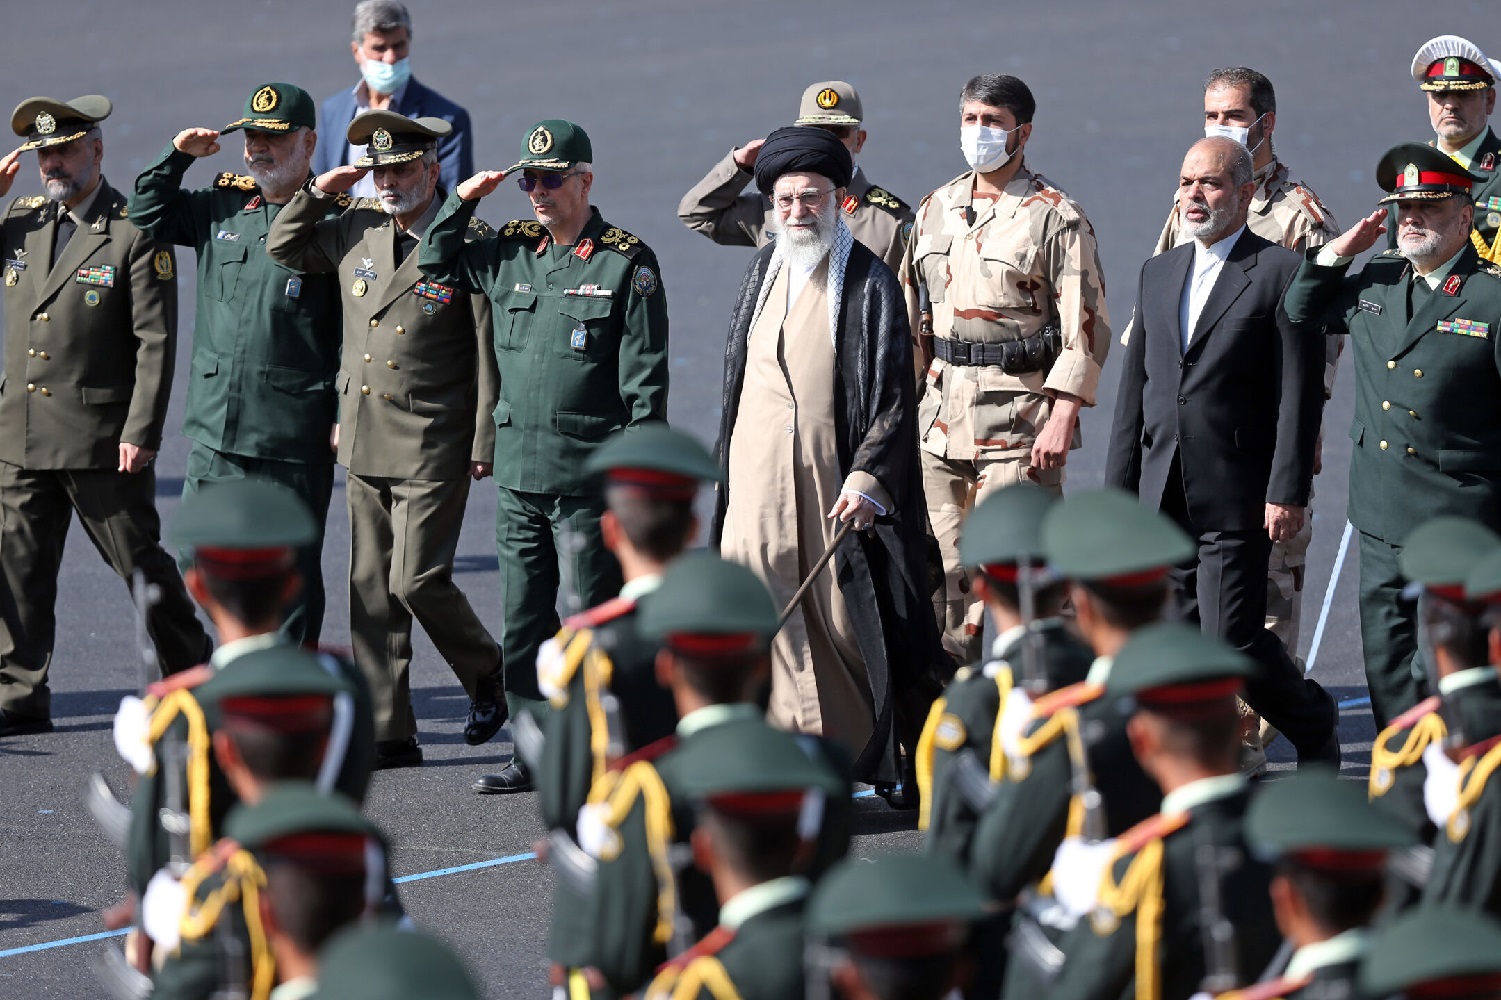 Iranian Supreme Leader Ali Khamenei attends the joint graduation ceremony of armed forces cadets at Imam Hussein Military University in Tehran, Iran on 3 October 2022. Photo by Iranian Leader Press Office / Handout / Anadolu Agency via Getty Images